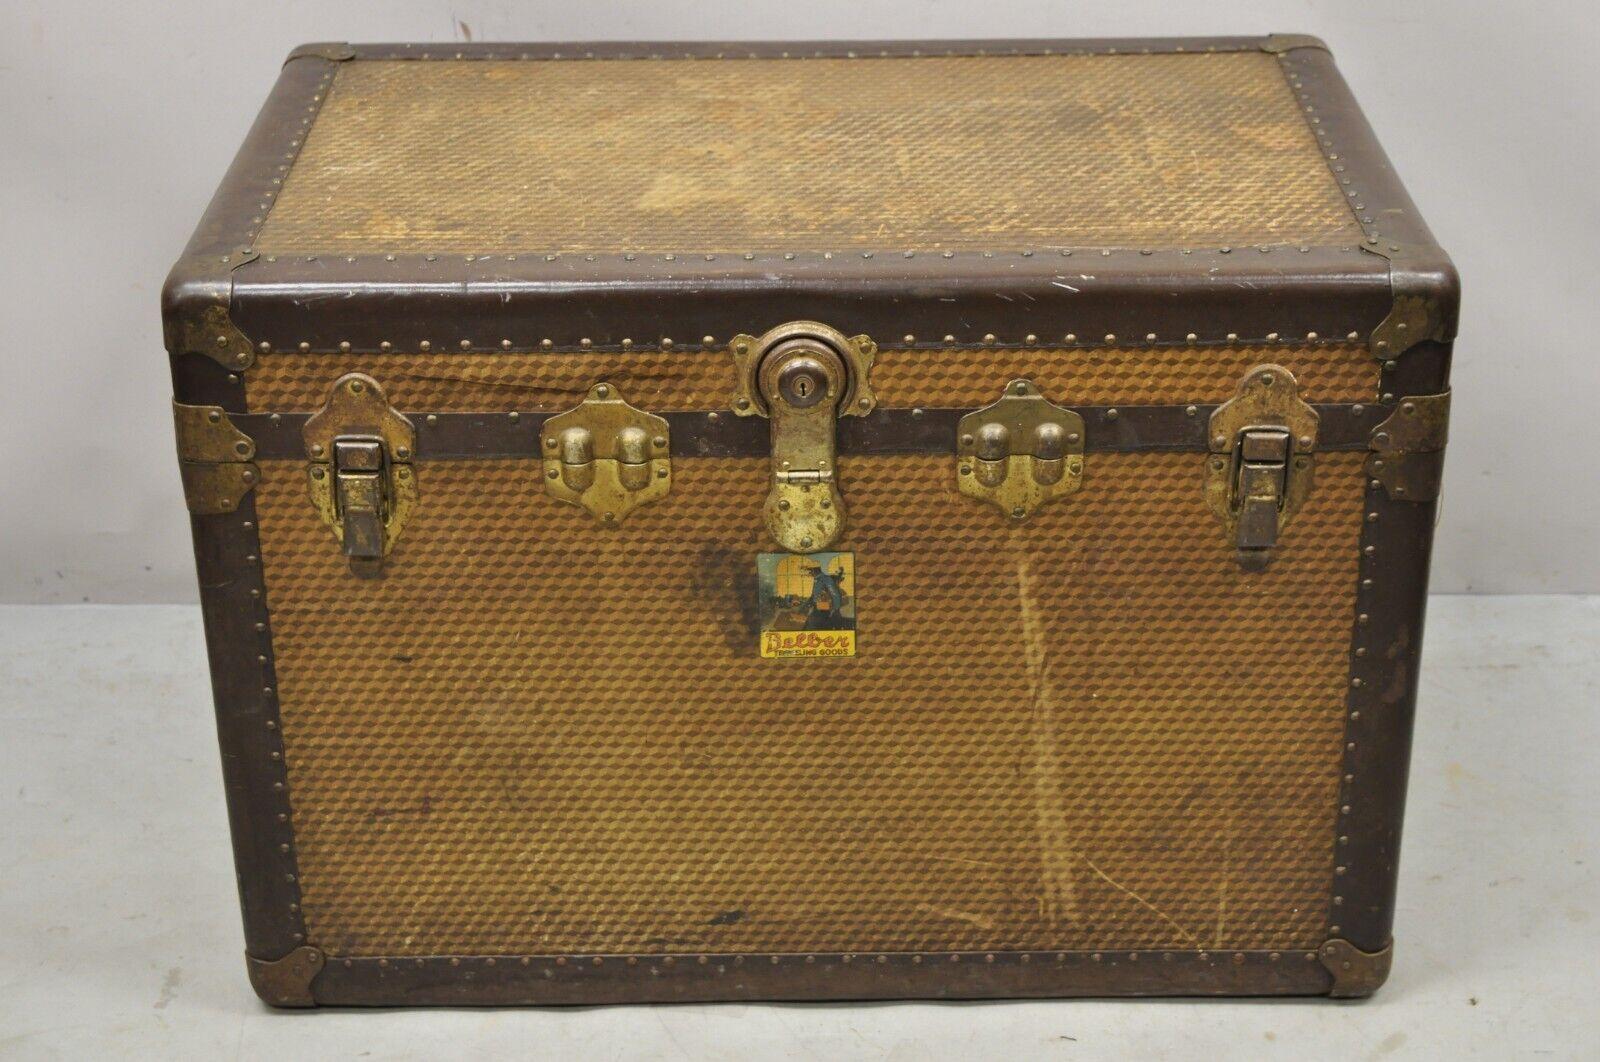 Antique Belber Traveling Goods Monogram Louis Style Hard Case Steamer Trunk. Item features a unique geometric monogram print throughout similar to LV, metal hardware, leather handles, lift out insert, original label, working lock and key, very nice